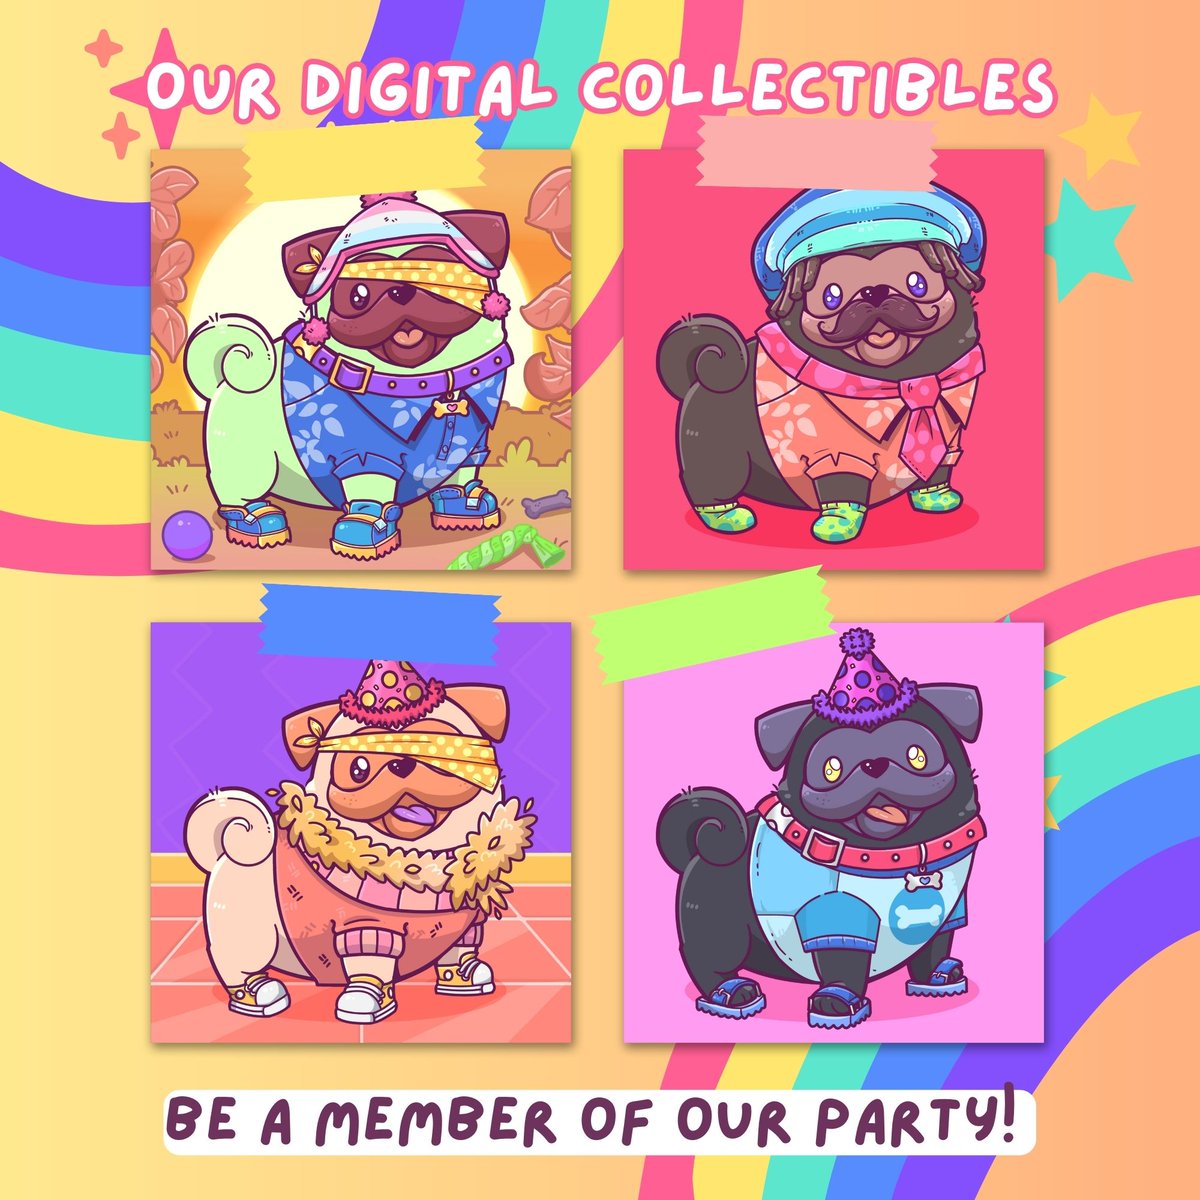 Calling all pug lovers! 📢 Join the Dali Pug party! 🎉 Grab our unique digital collectibles and become part of our community. Let's spread the pug love together! 🐾 Get started here: opensea.io/collection/dal…
🌸🐶
#DaliPug #PugLovers #DigitalCollectibles #JoinTheParty